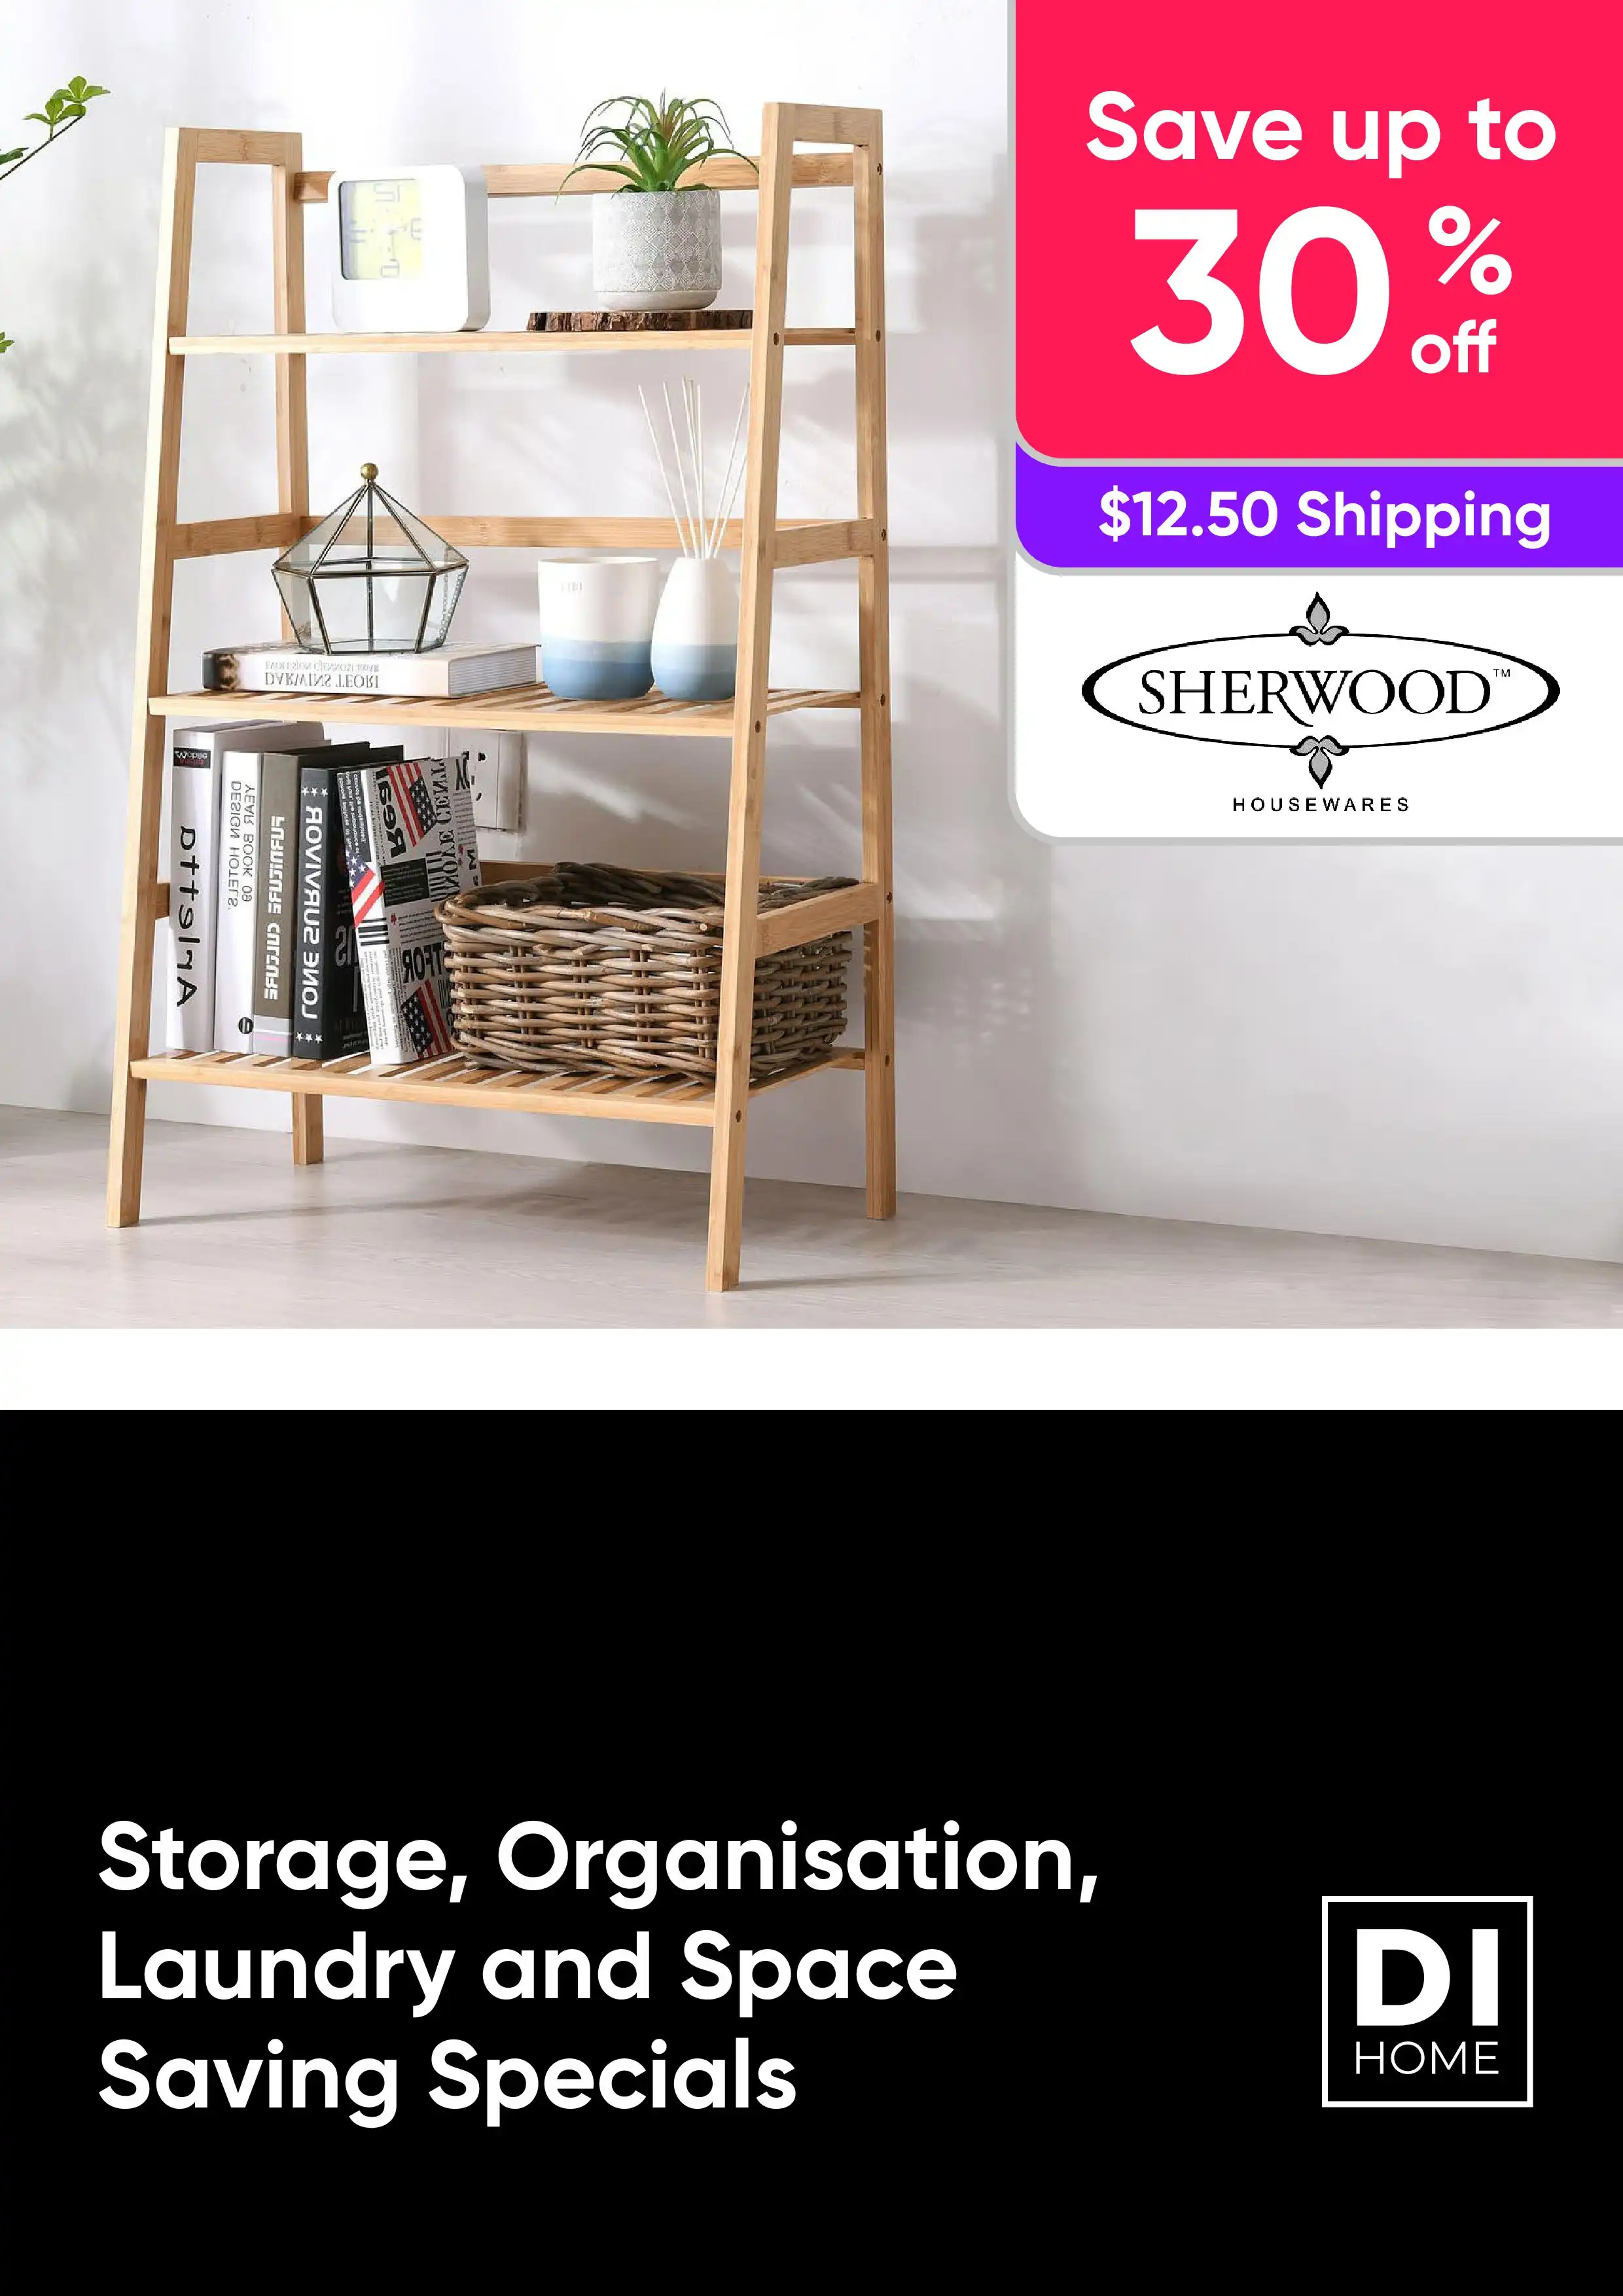 Storage, Organisation, Laundry and Space Saving Products - Save up to 30% off